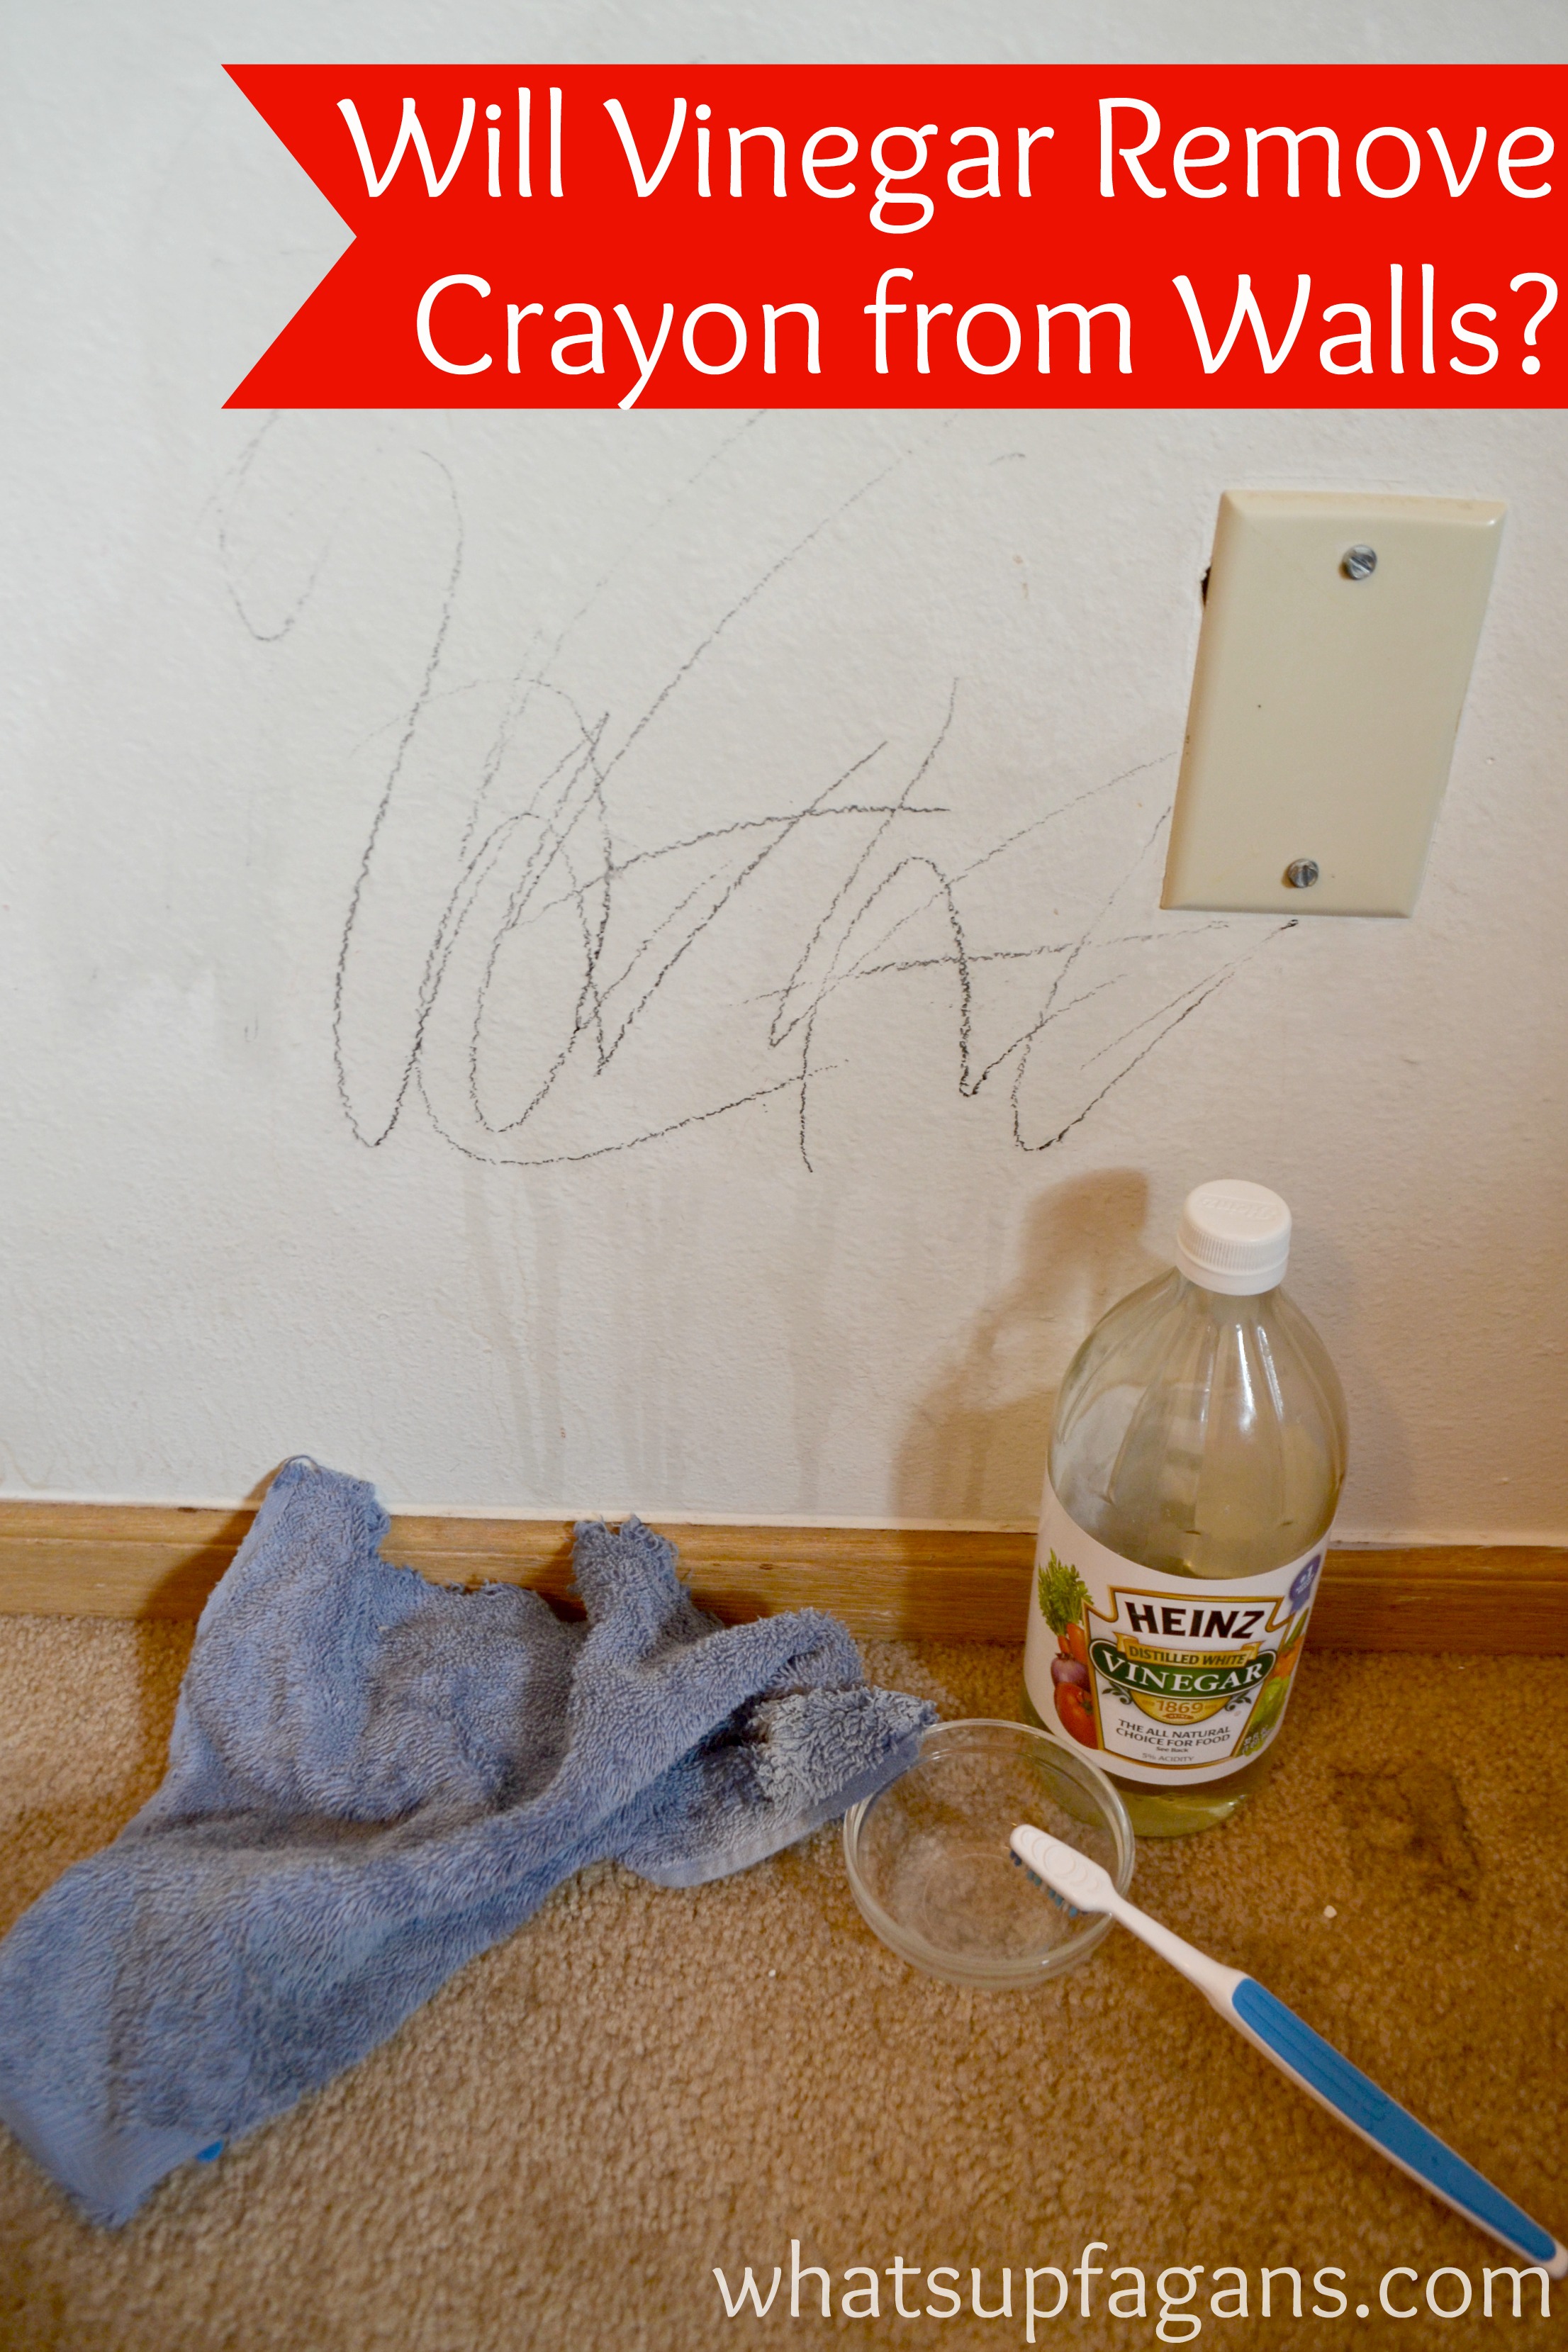 25 Methods that Actually Work to Remove Crayon from Walls